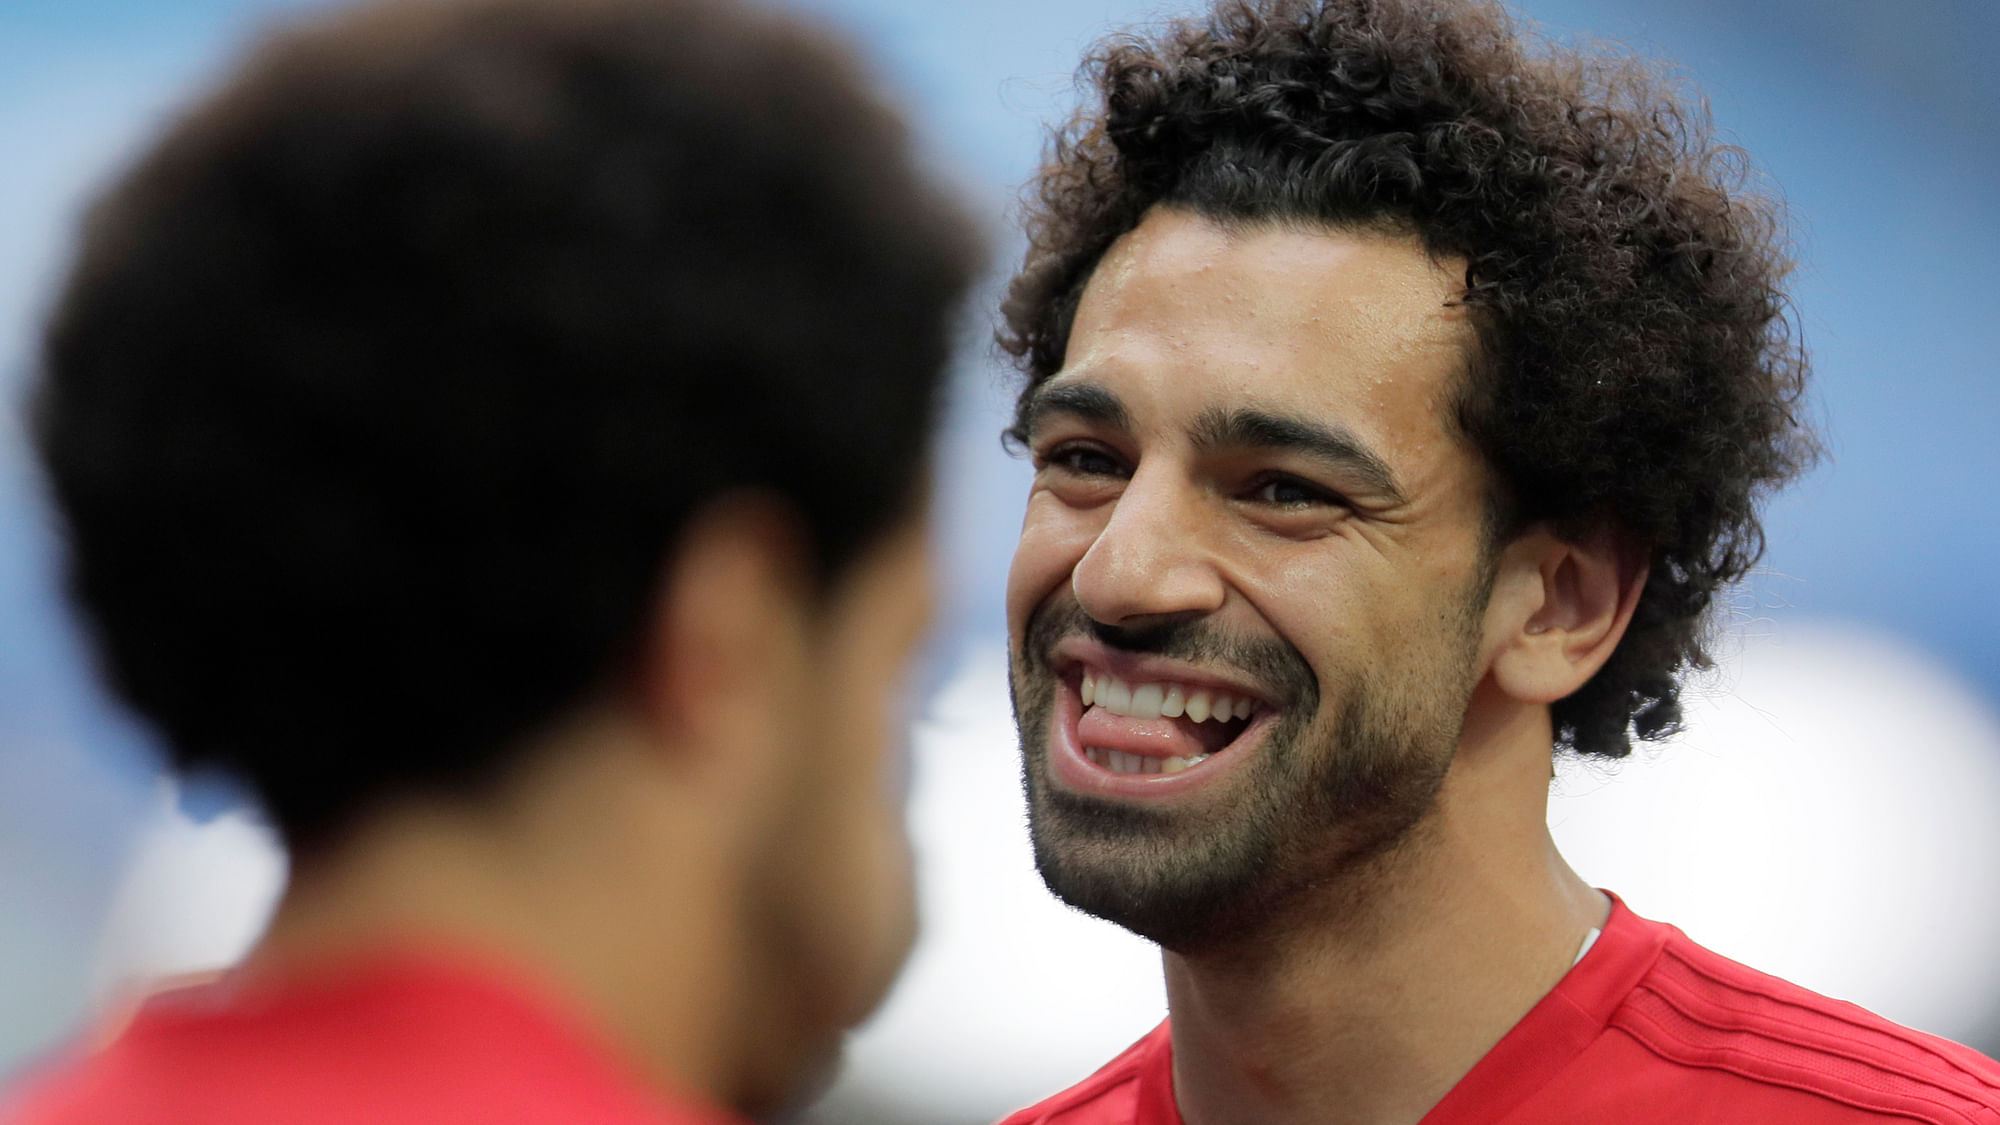 Mohamed Salah was named in England’s starting line-up against Russia.